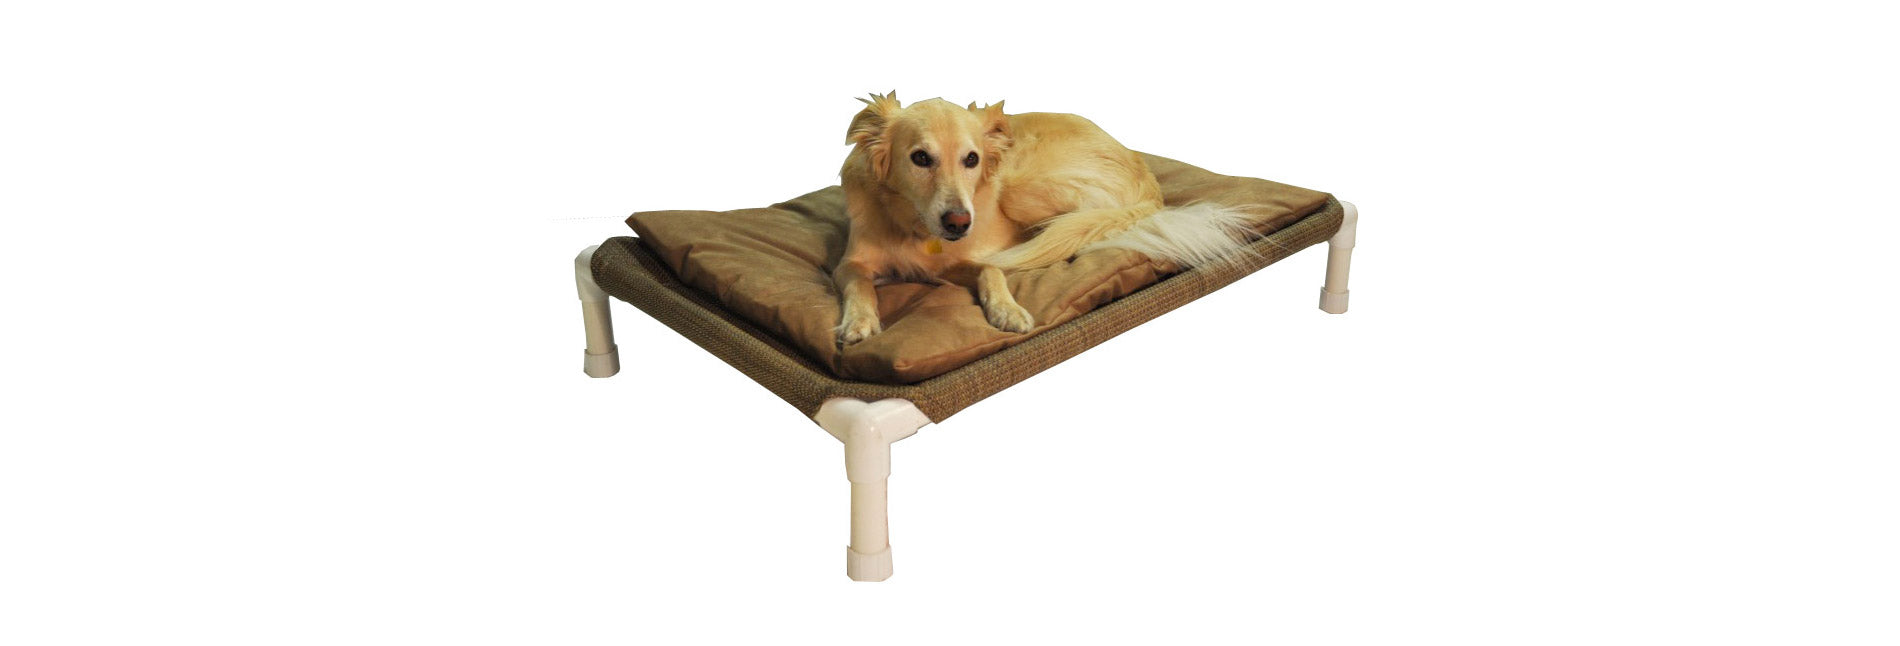 Do dogs need a dog bed?